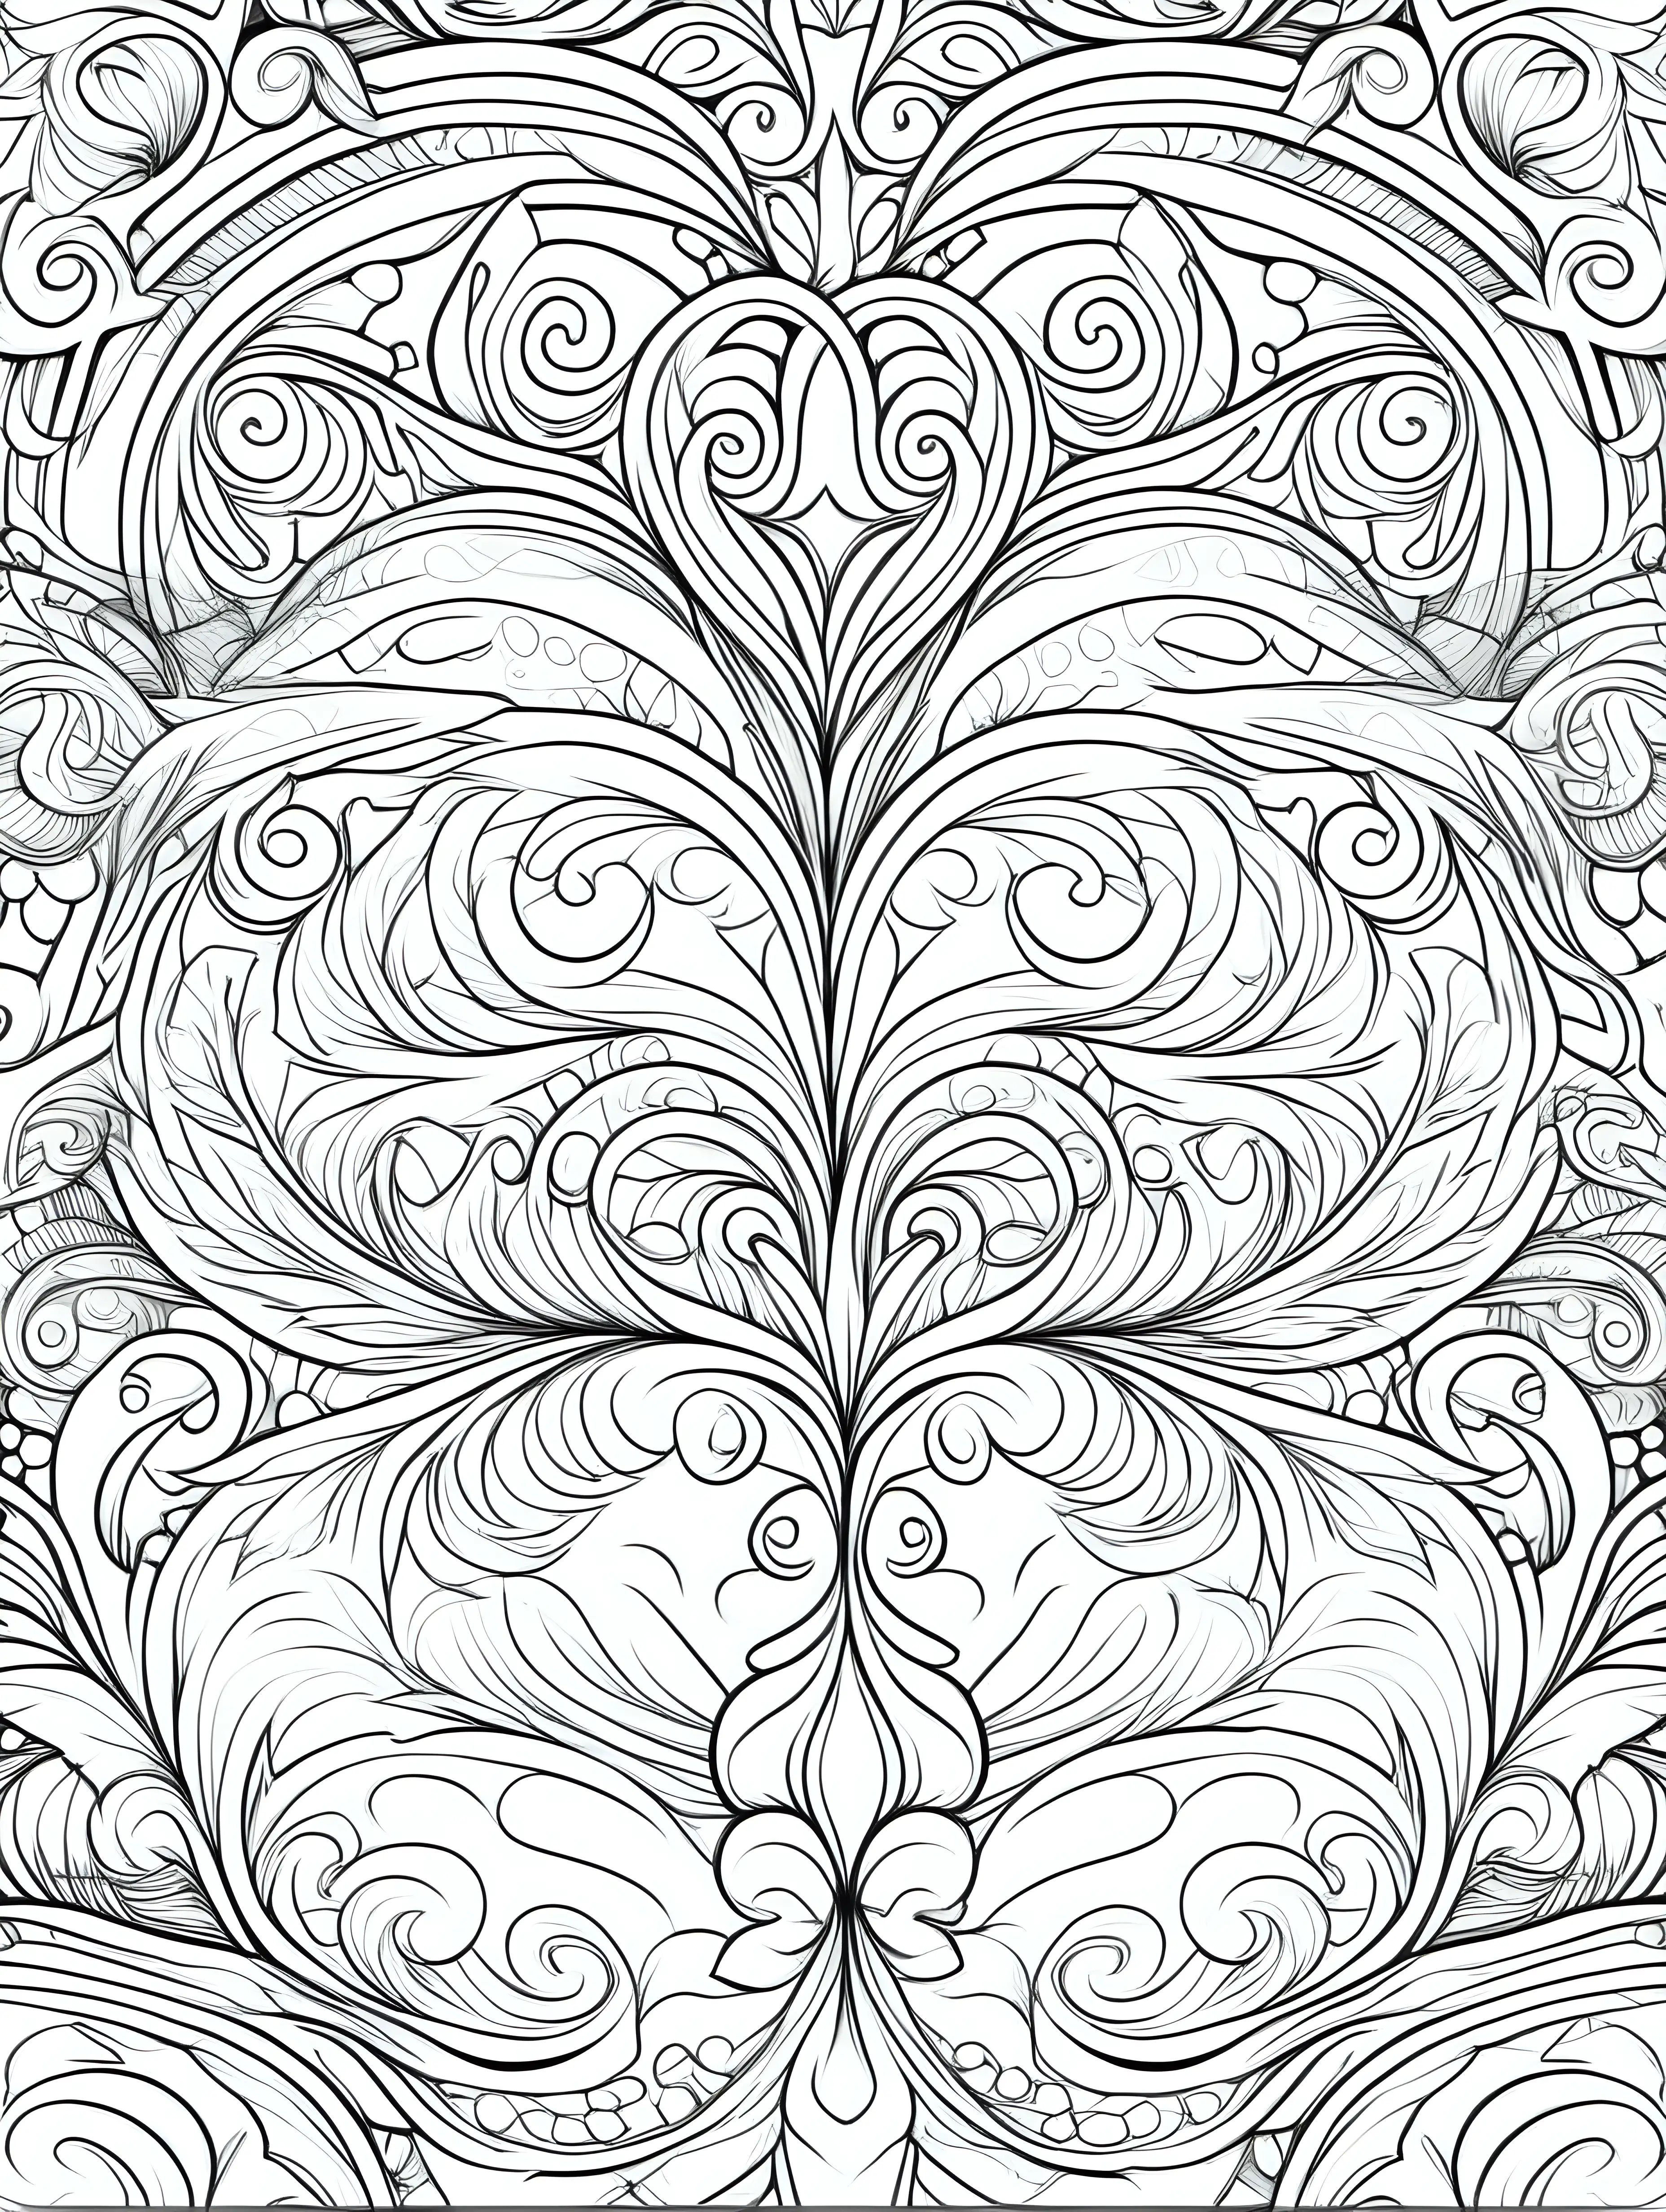 Enchanting Magical Pattern Coloring Page on Clear White Background